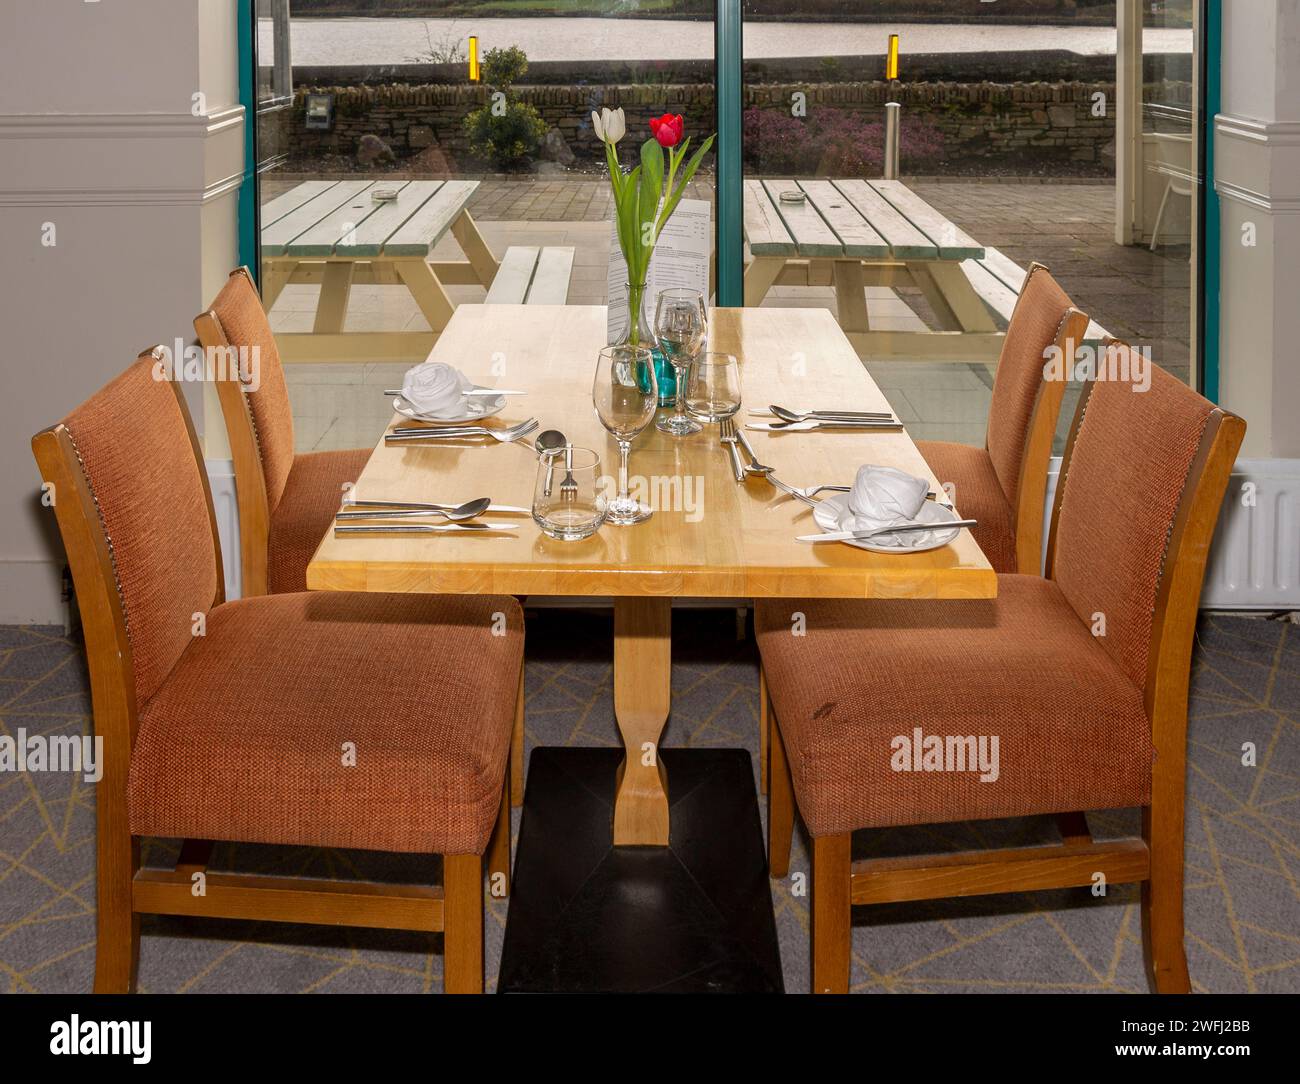 Restaurant table with empty seats. Stock Photo